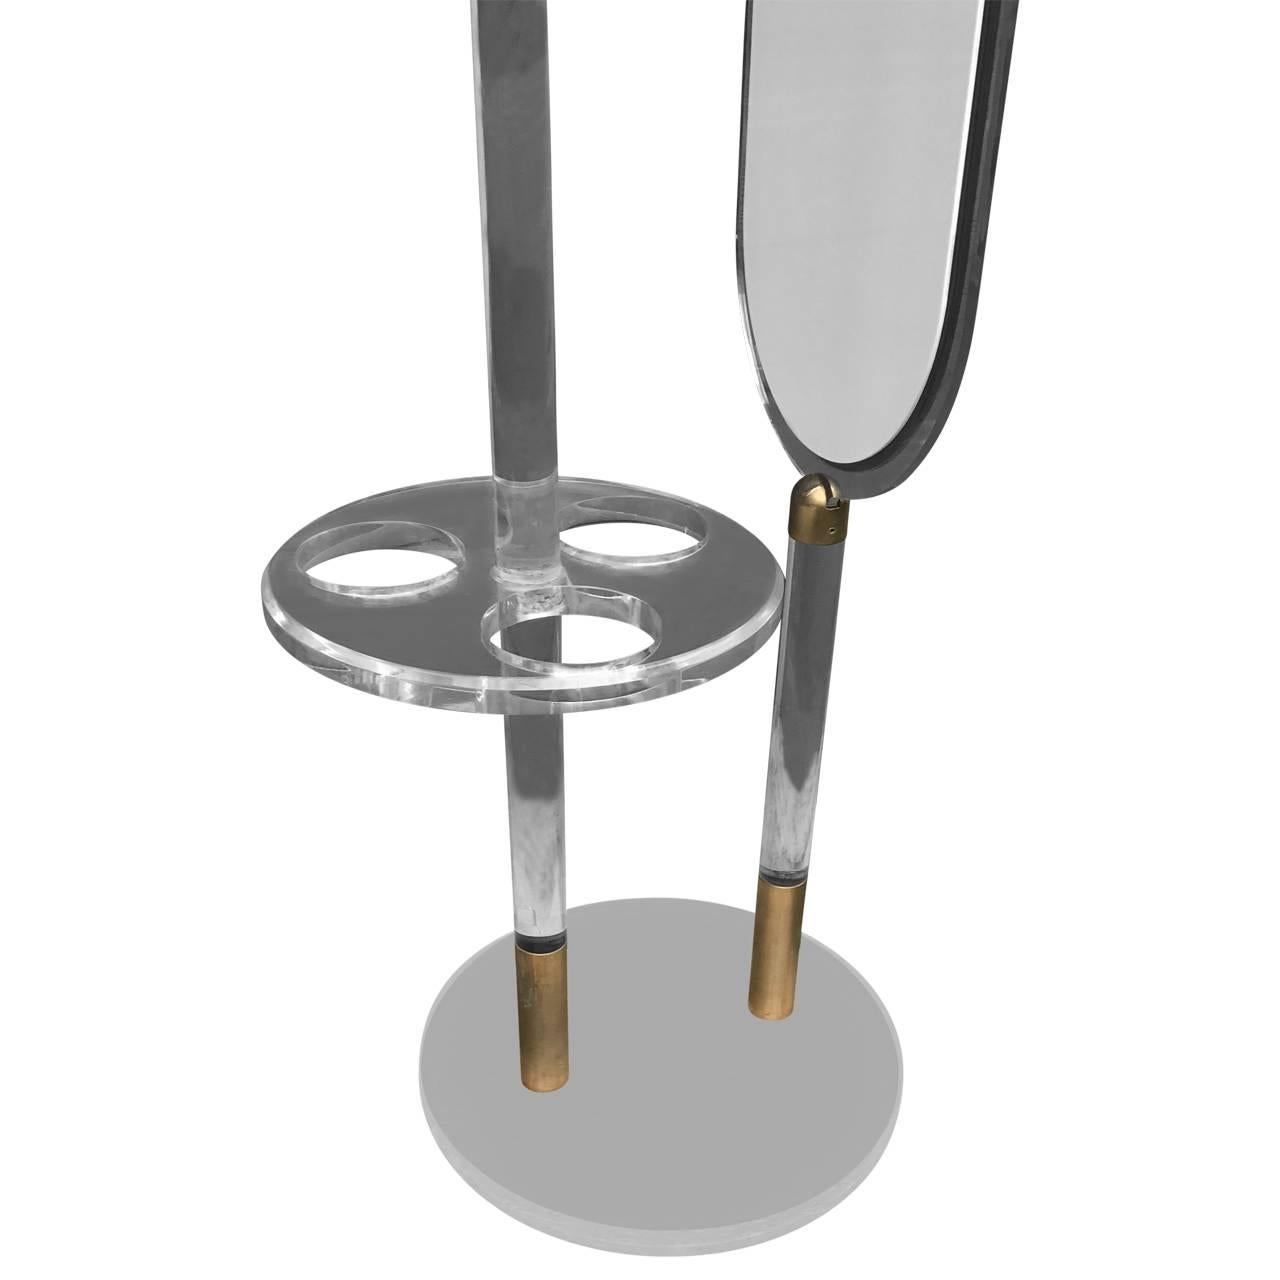 Frosted Italian Lucite Mirror, Umbrella Valet Stand 